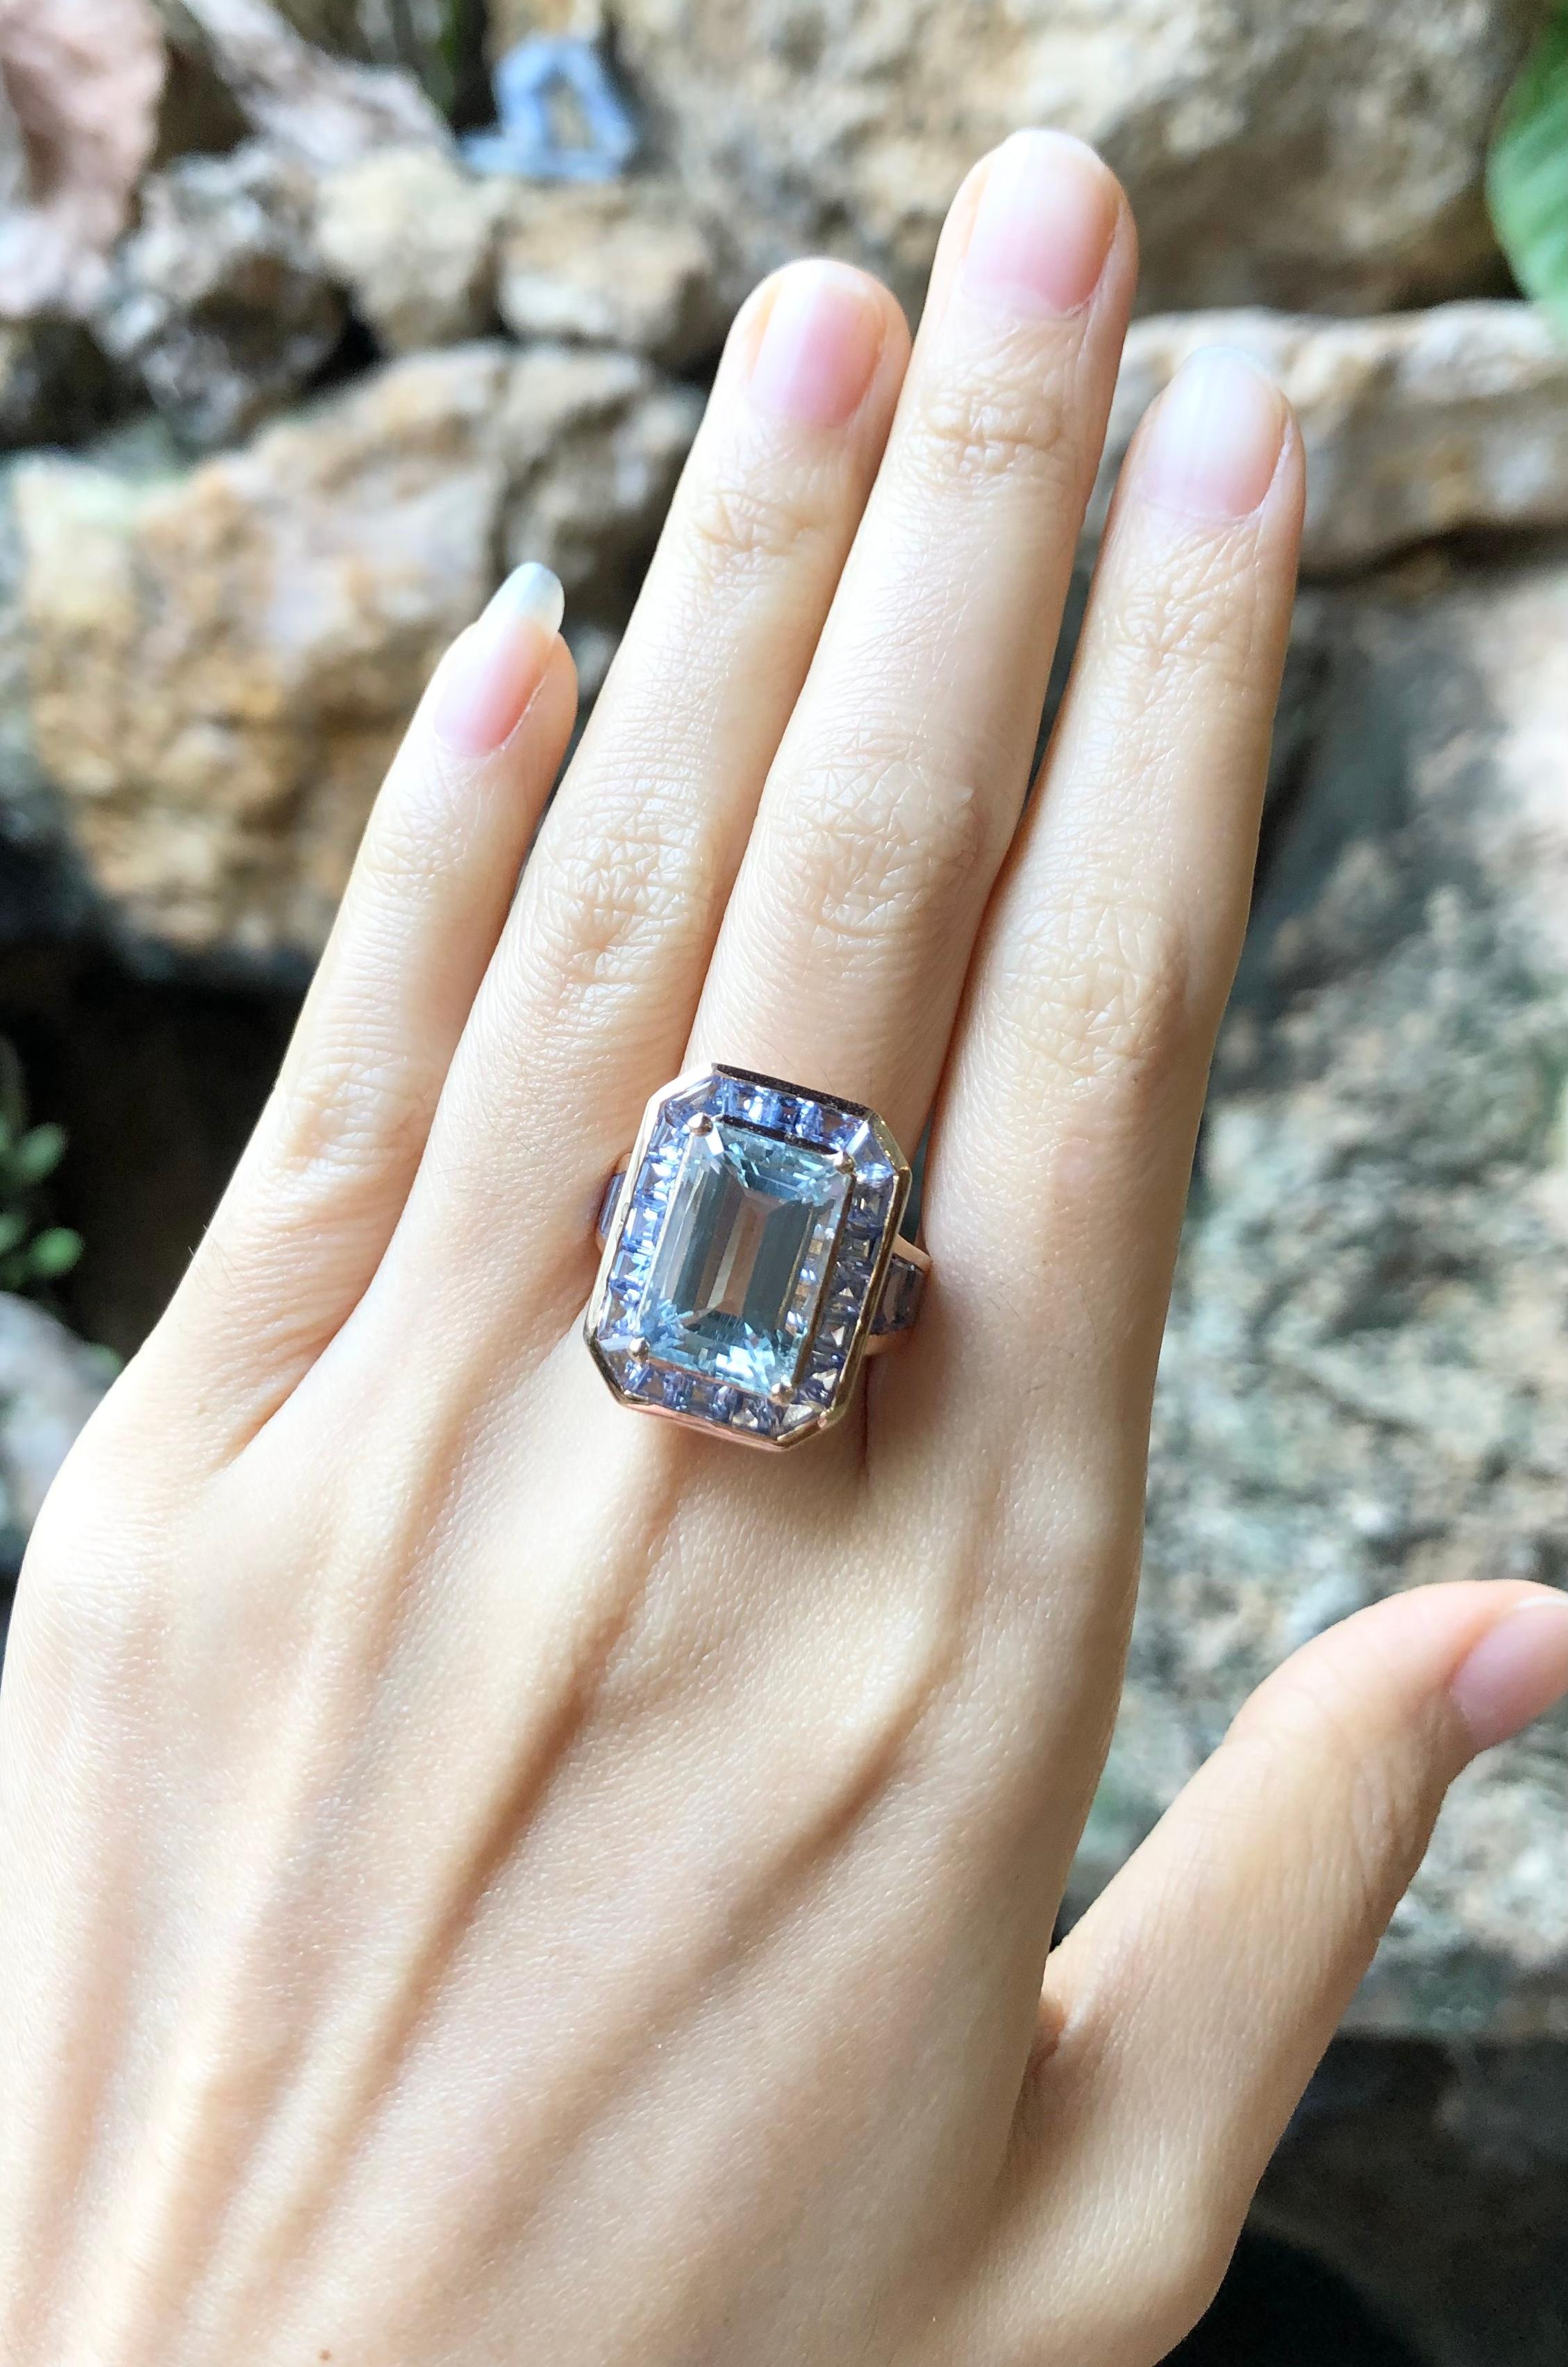 Aquamarine 7.03 carats with Blue Sapphire 4.57 carats Ring set in 18 Karat Rose Gold Settings

Width:  1.6 cm 
Length 2.1 cm
Ring Size: 54
Total Weight: 14.73 grams

Aquamarine 
Width:  1.0 cm 
Length 1.5 cm

